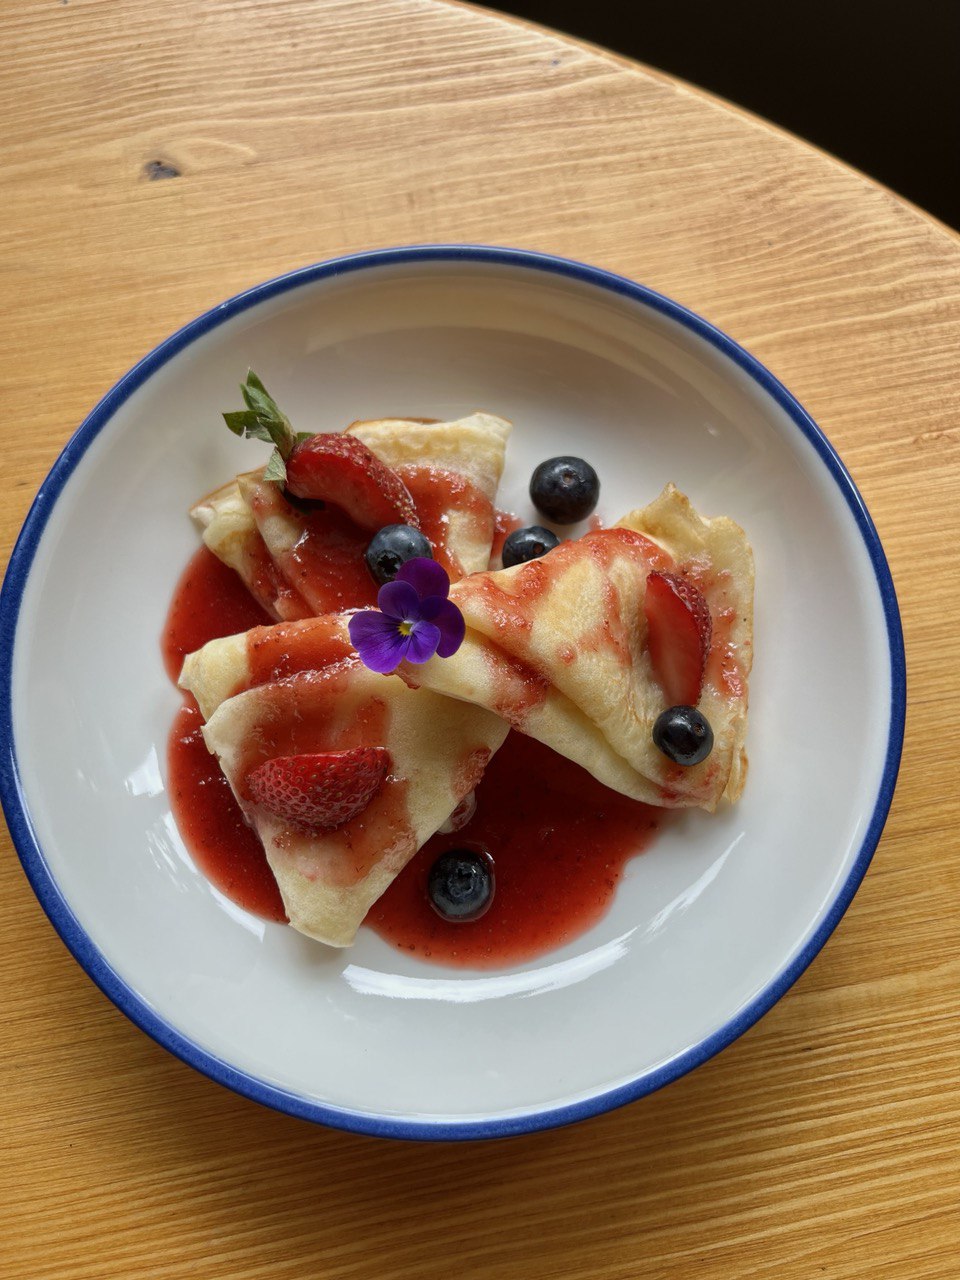 18. Crepes with berrie jam